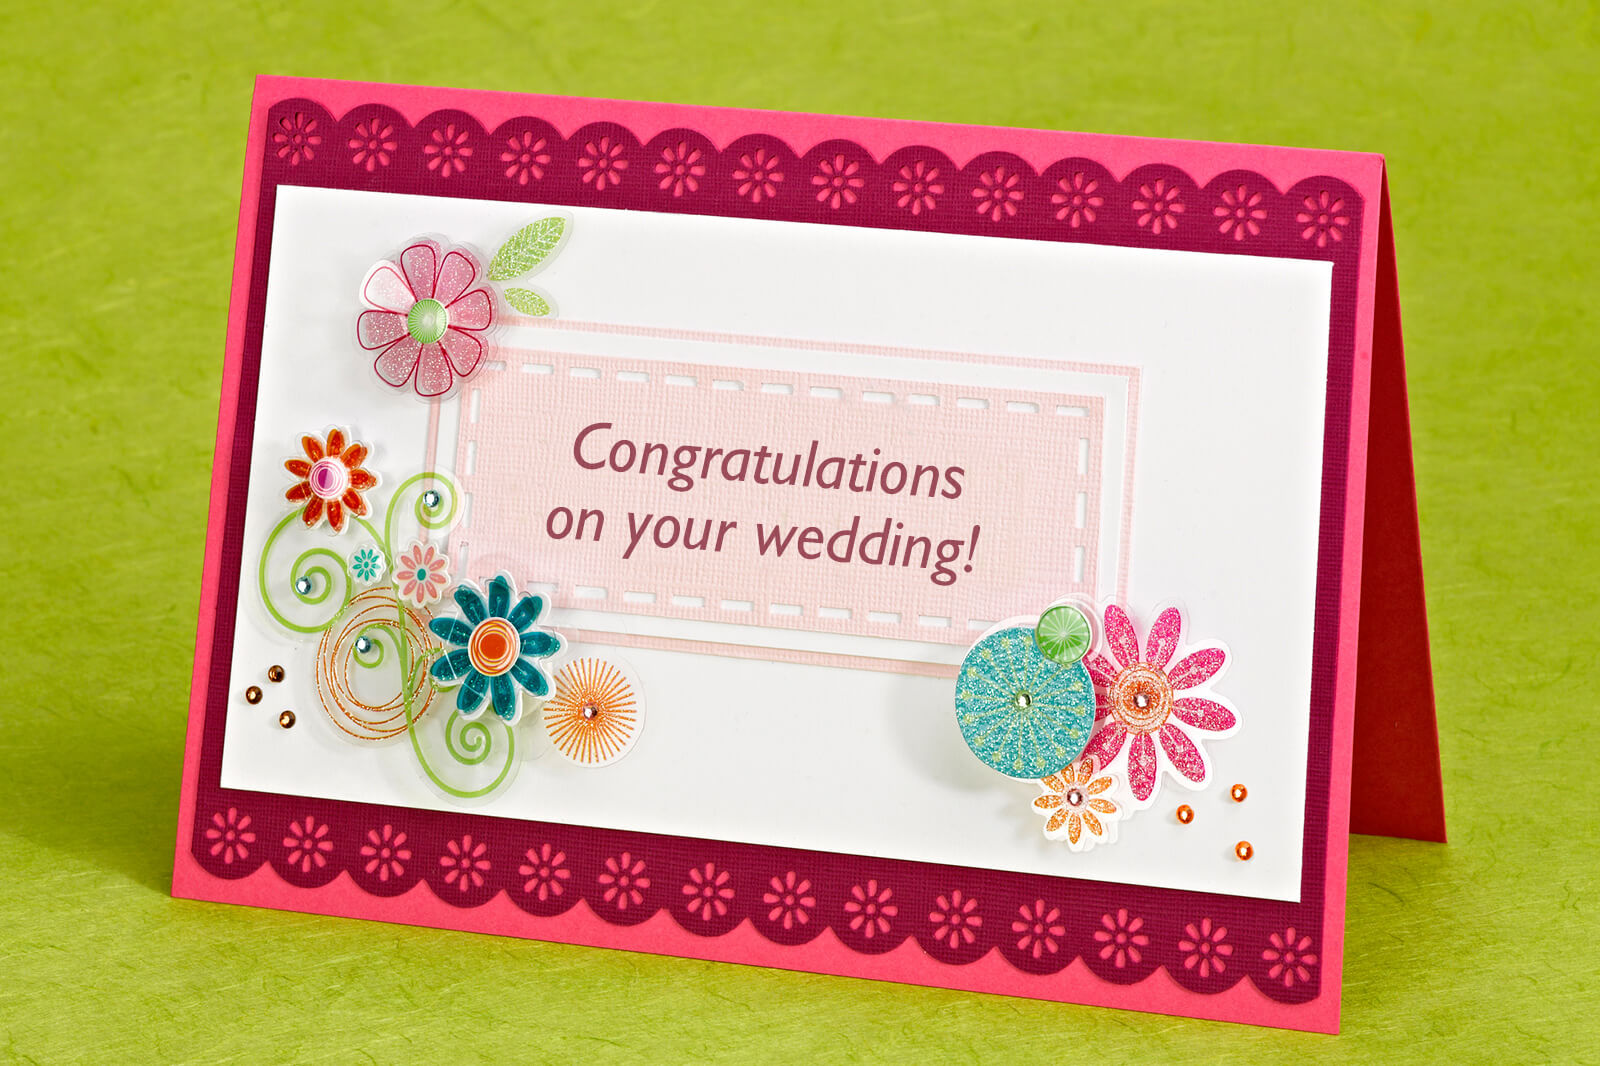 Words Of Congratulations For A Wedding | Lovetoknow For Death Anniversary Cards Templates